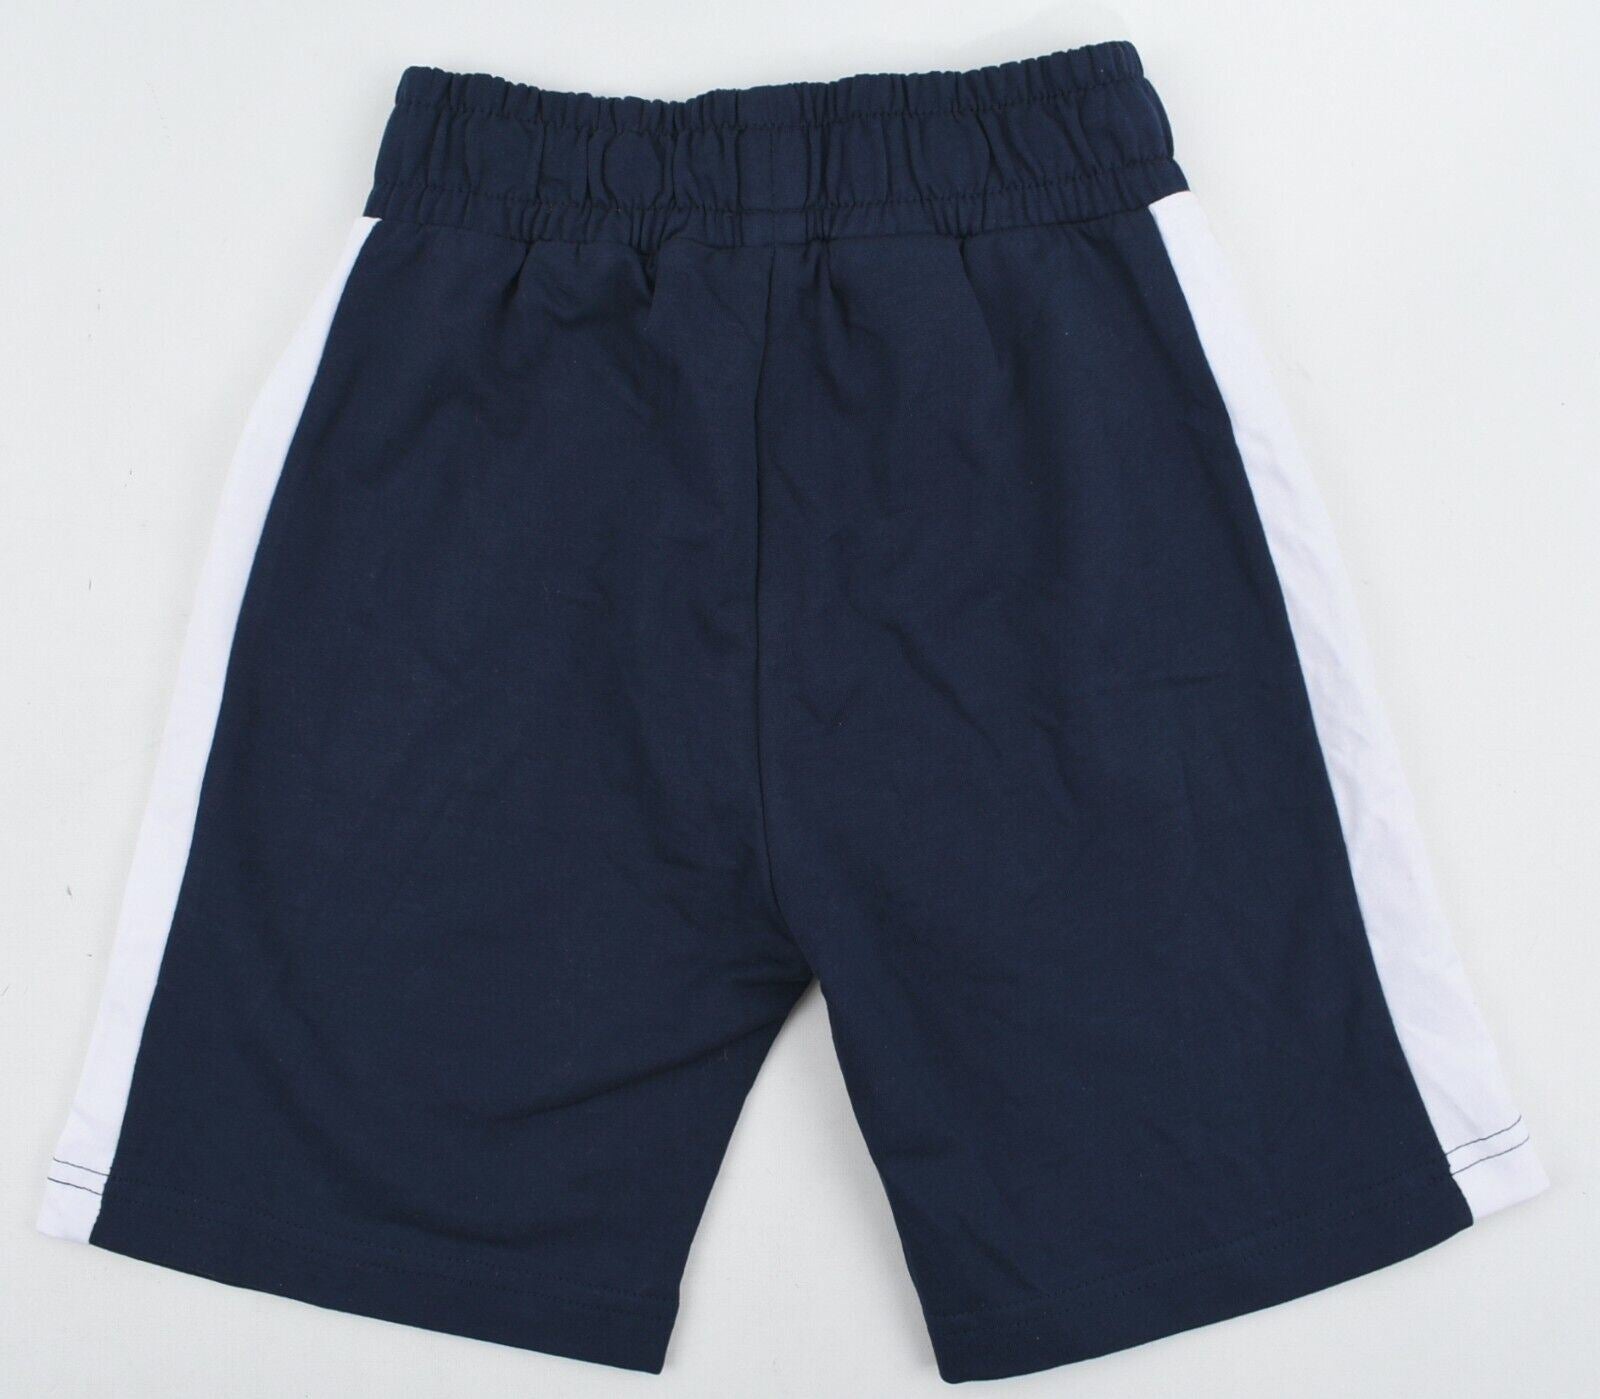 FILA Boys French Terry Cotton Shorts, Blue/White, size 5-6 years